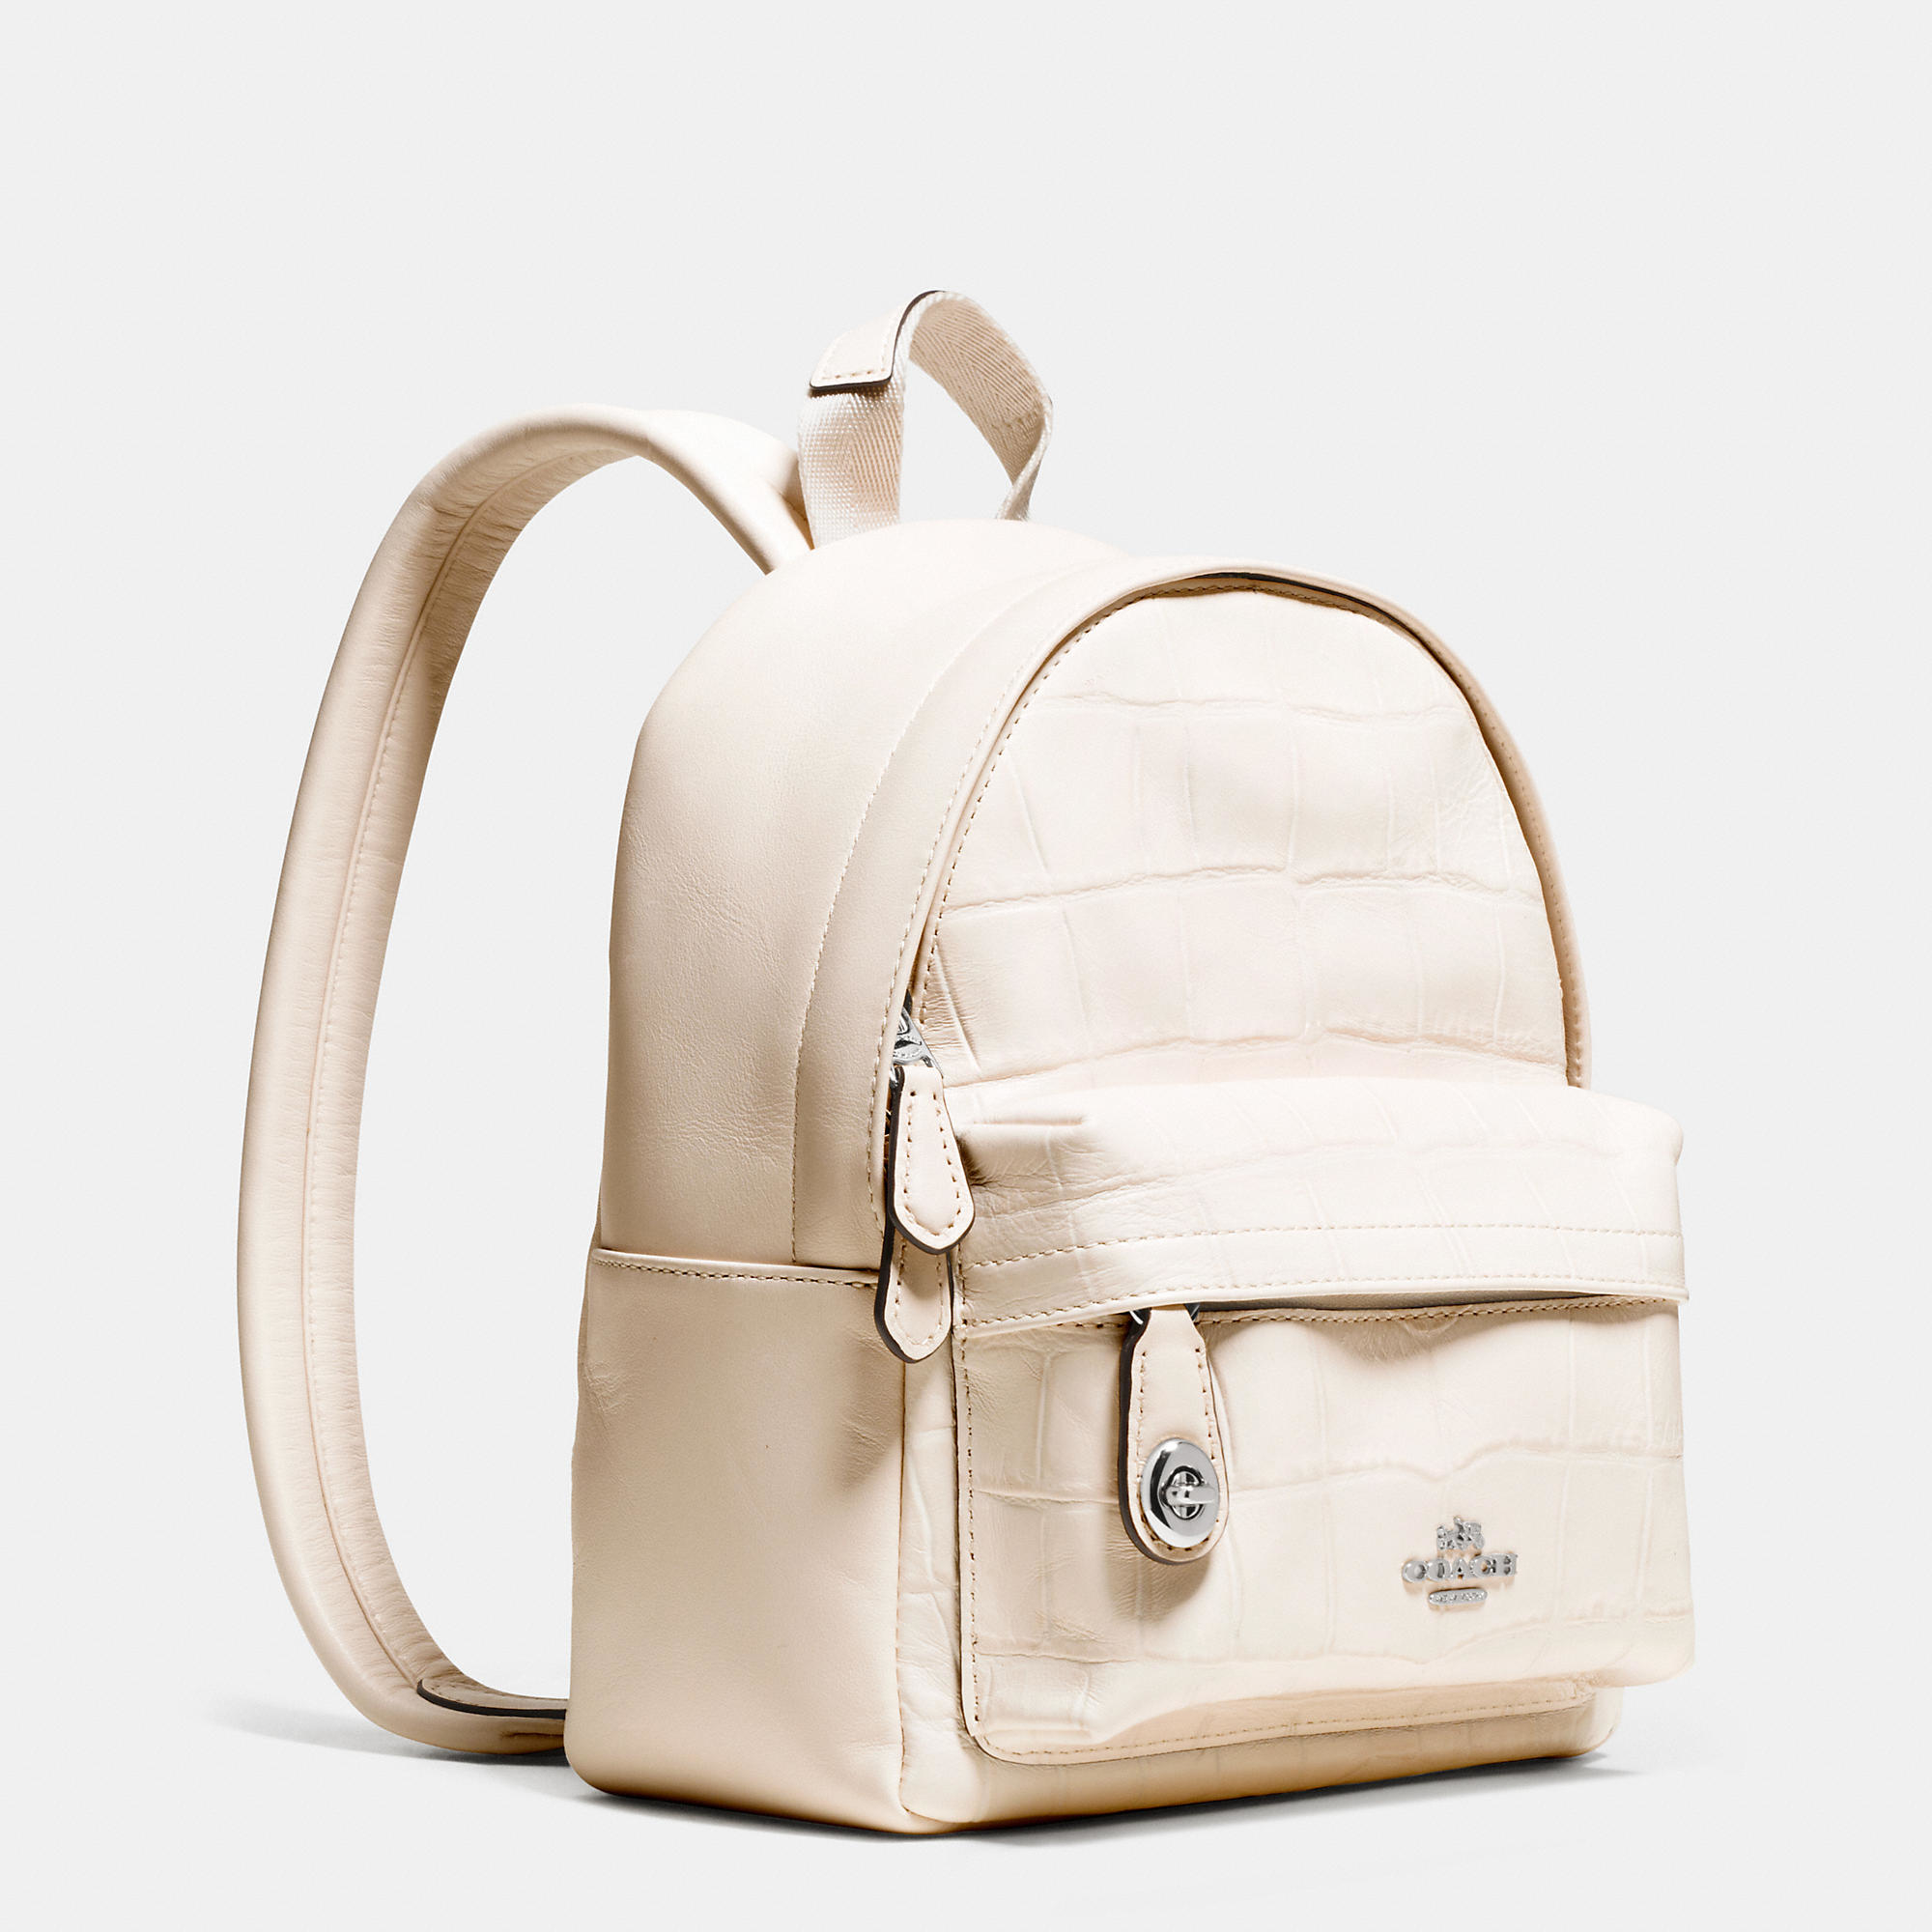 Lyst - Coach Mini Campus Backpack In Croc Embossed Leather in White